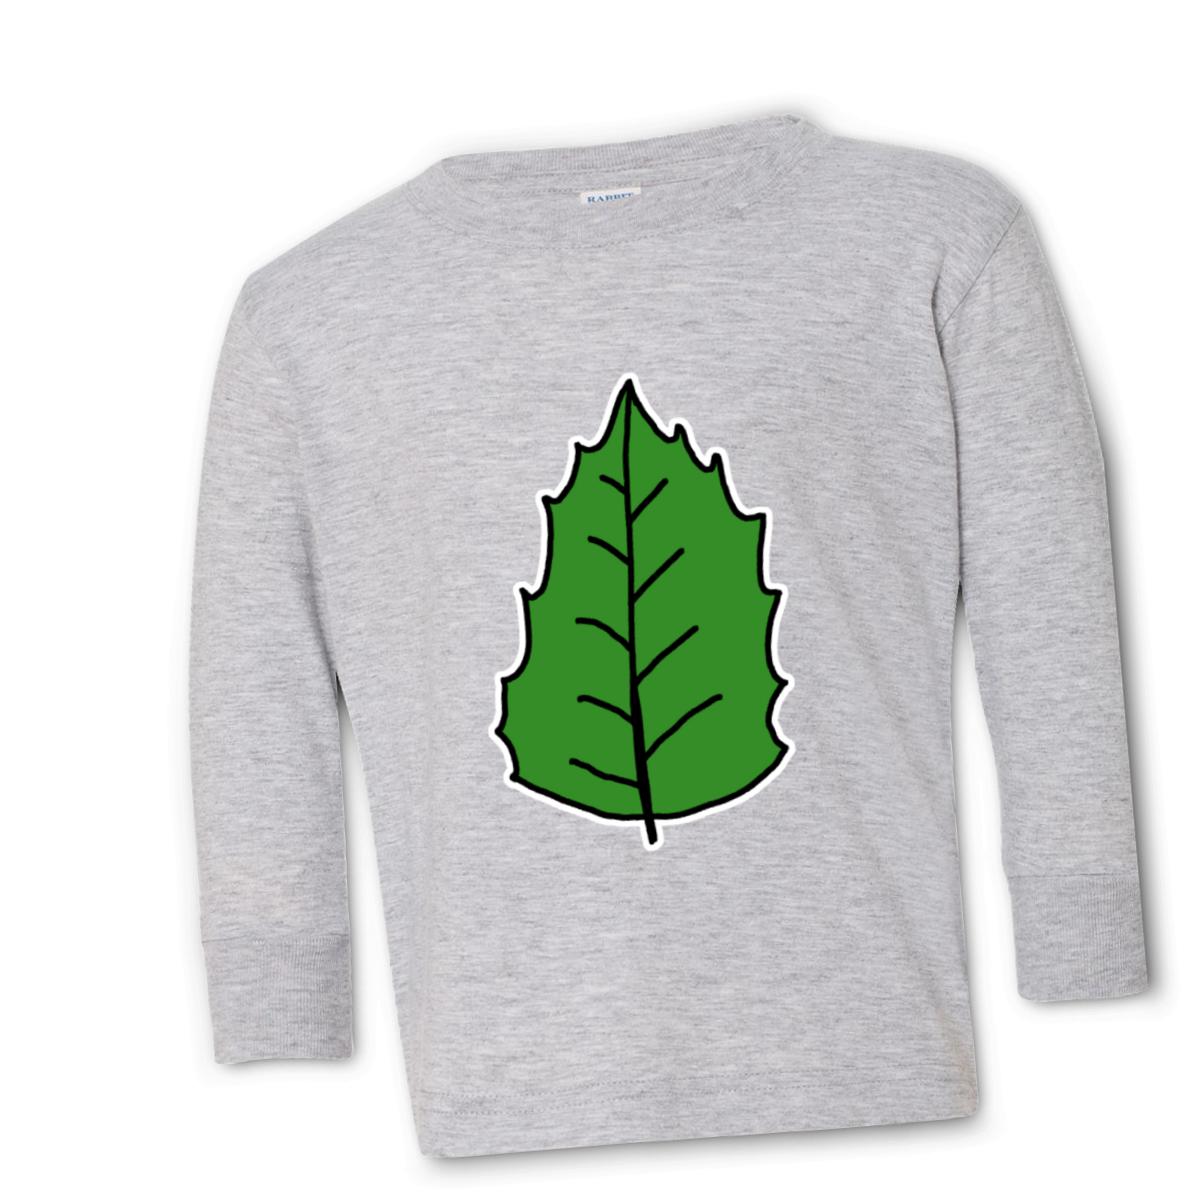 Holly Leaf Toddler Long Sleeve Tee 2T heather